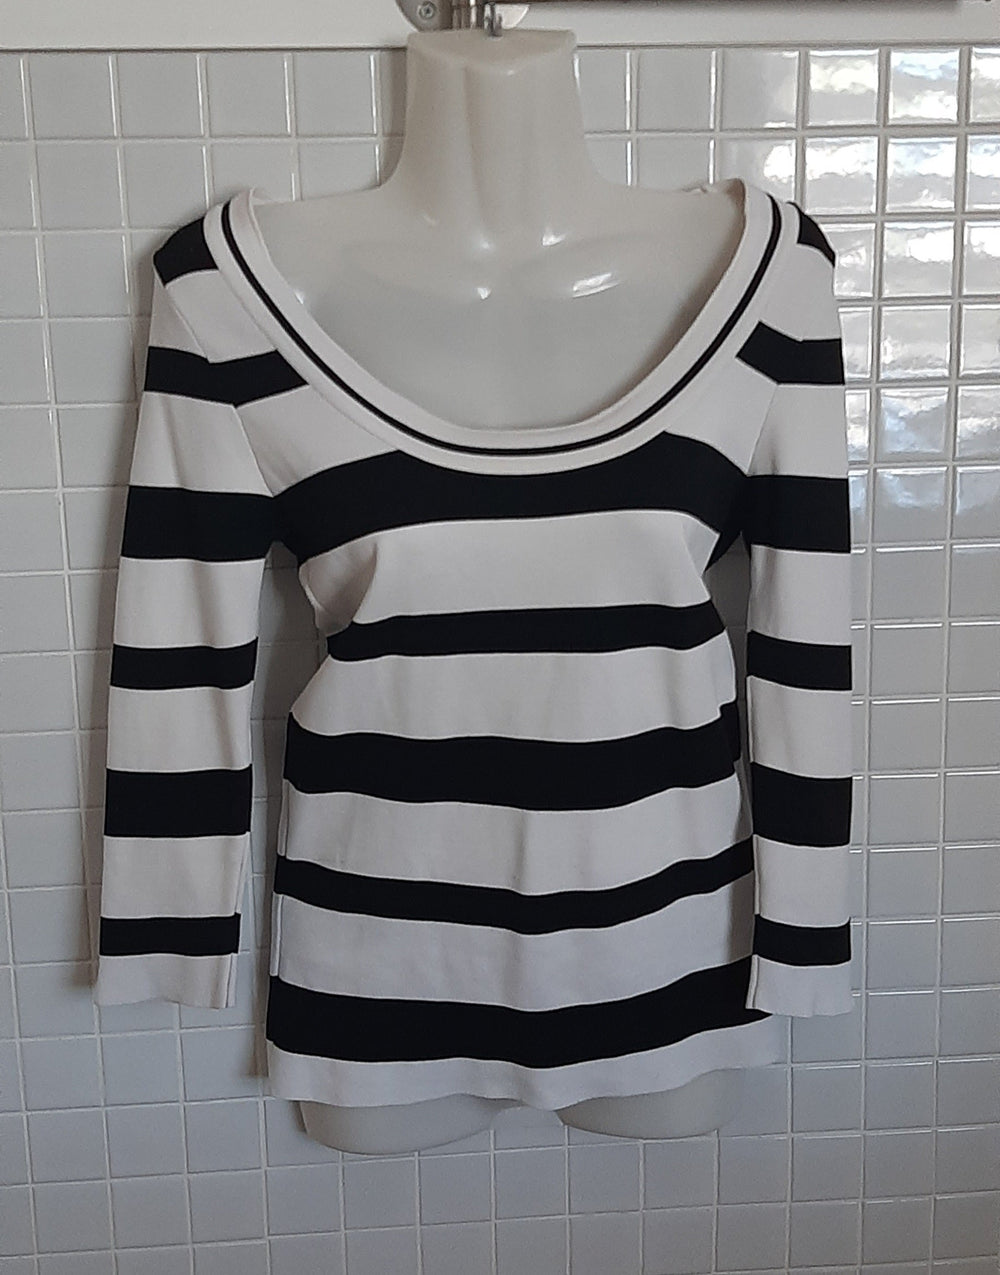 Image of Staple Black and Cream Striped Top